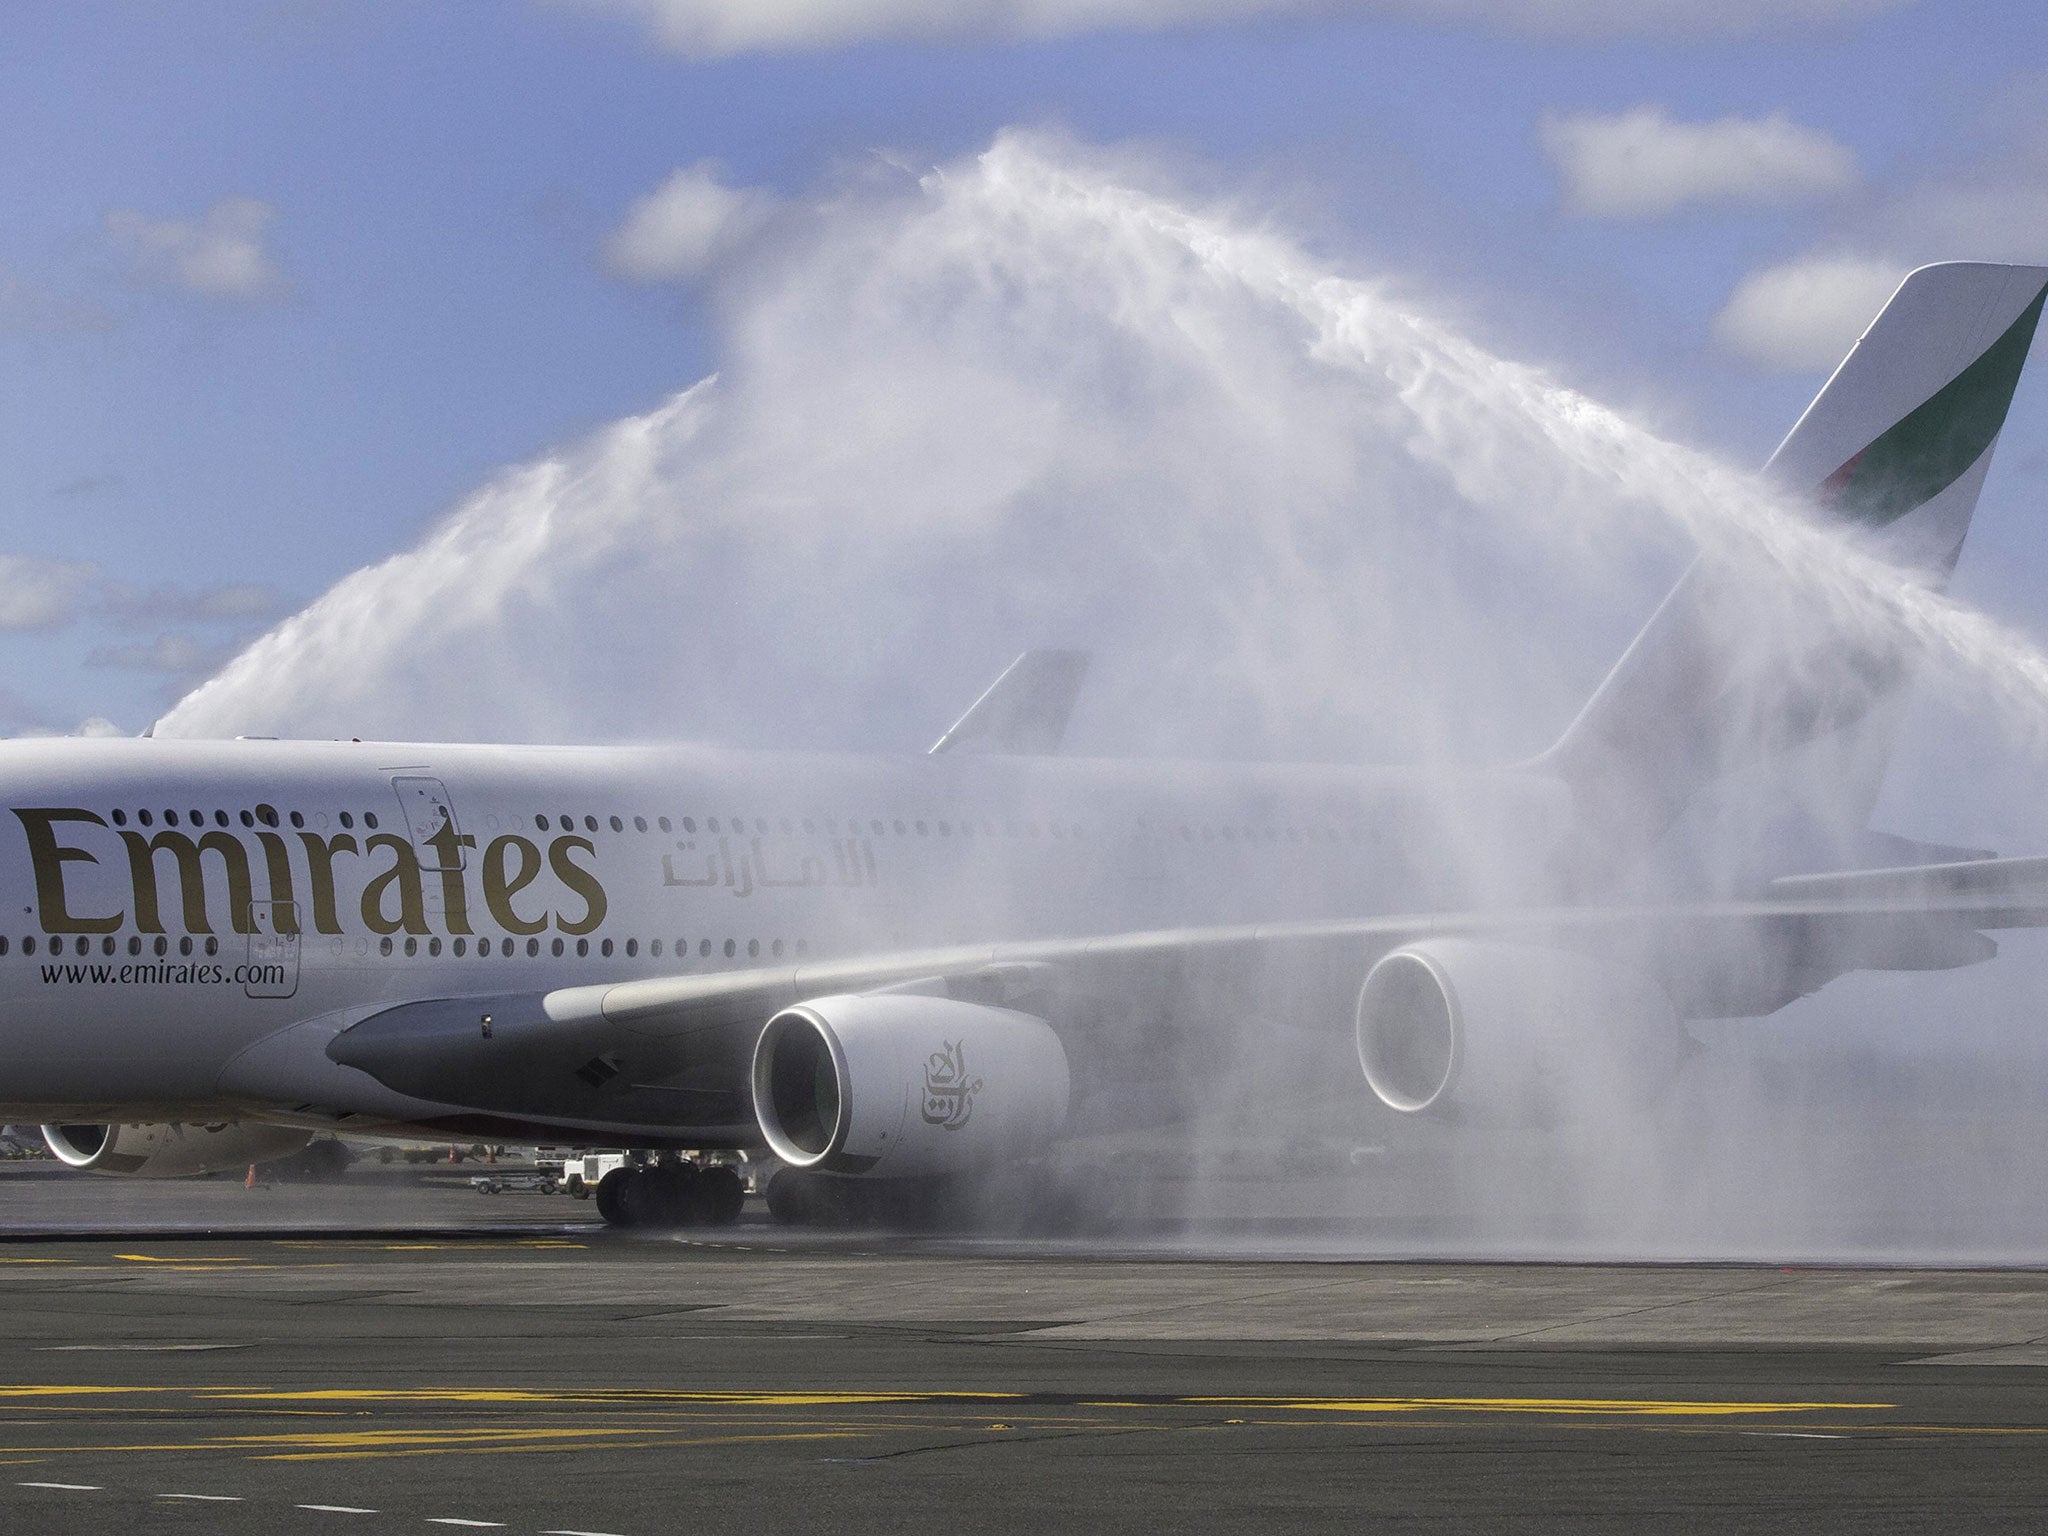 The Emirates Airbus A380 on the tarmac shortly after touching down in Auckland